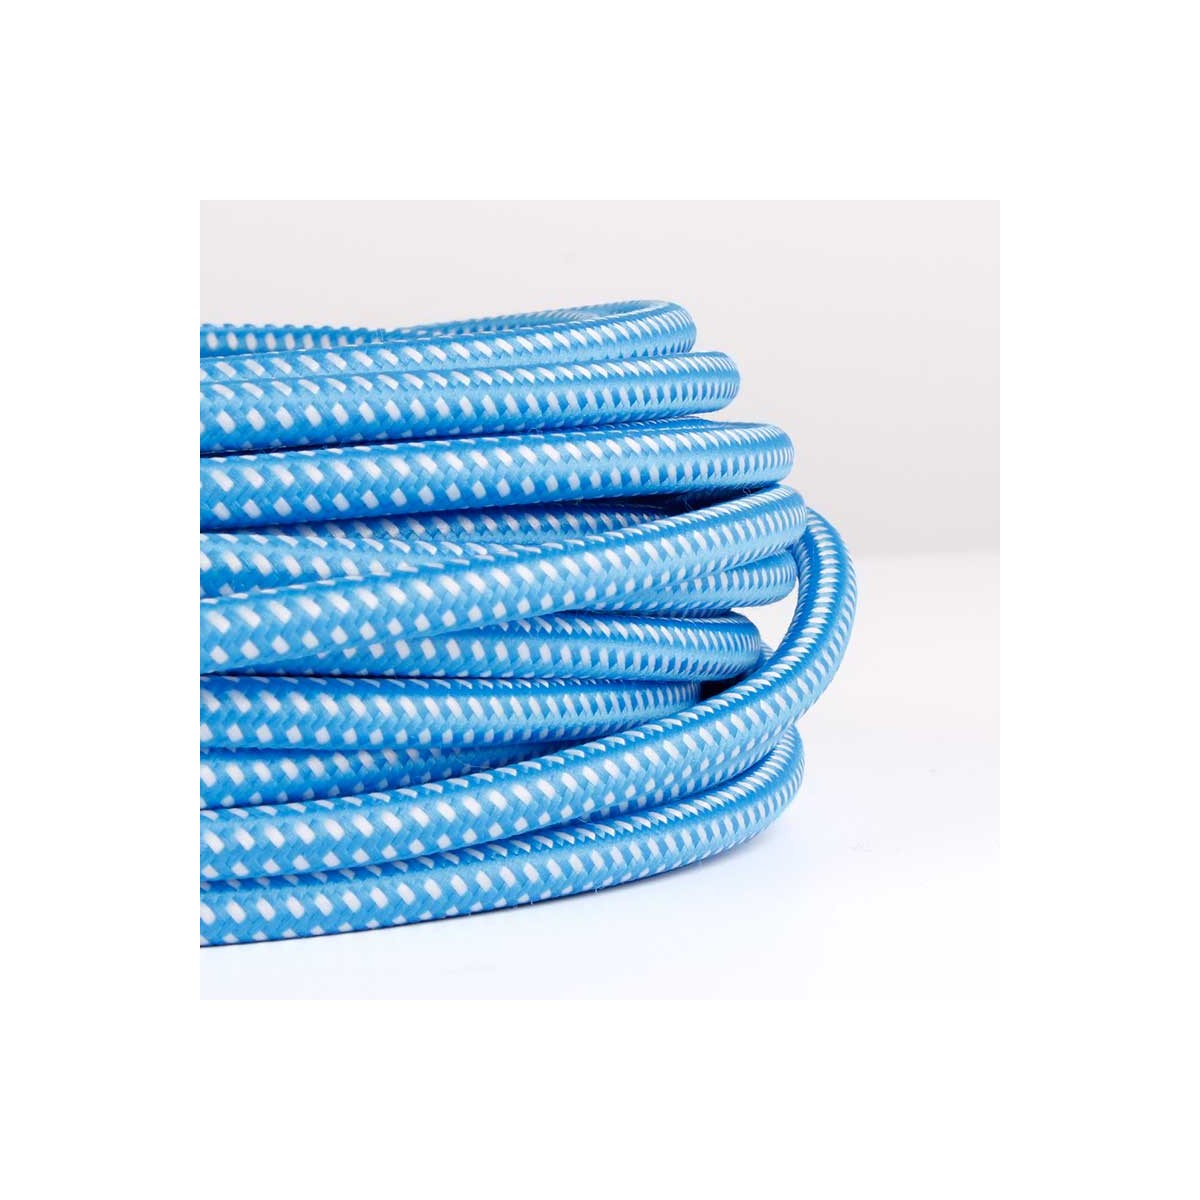 Round Electric Cable coated in Silk Effect Fabric Blue &amp; White Color